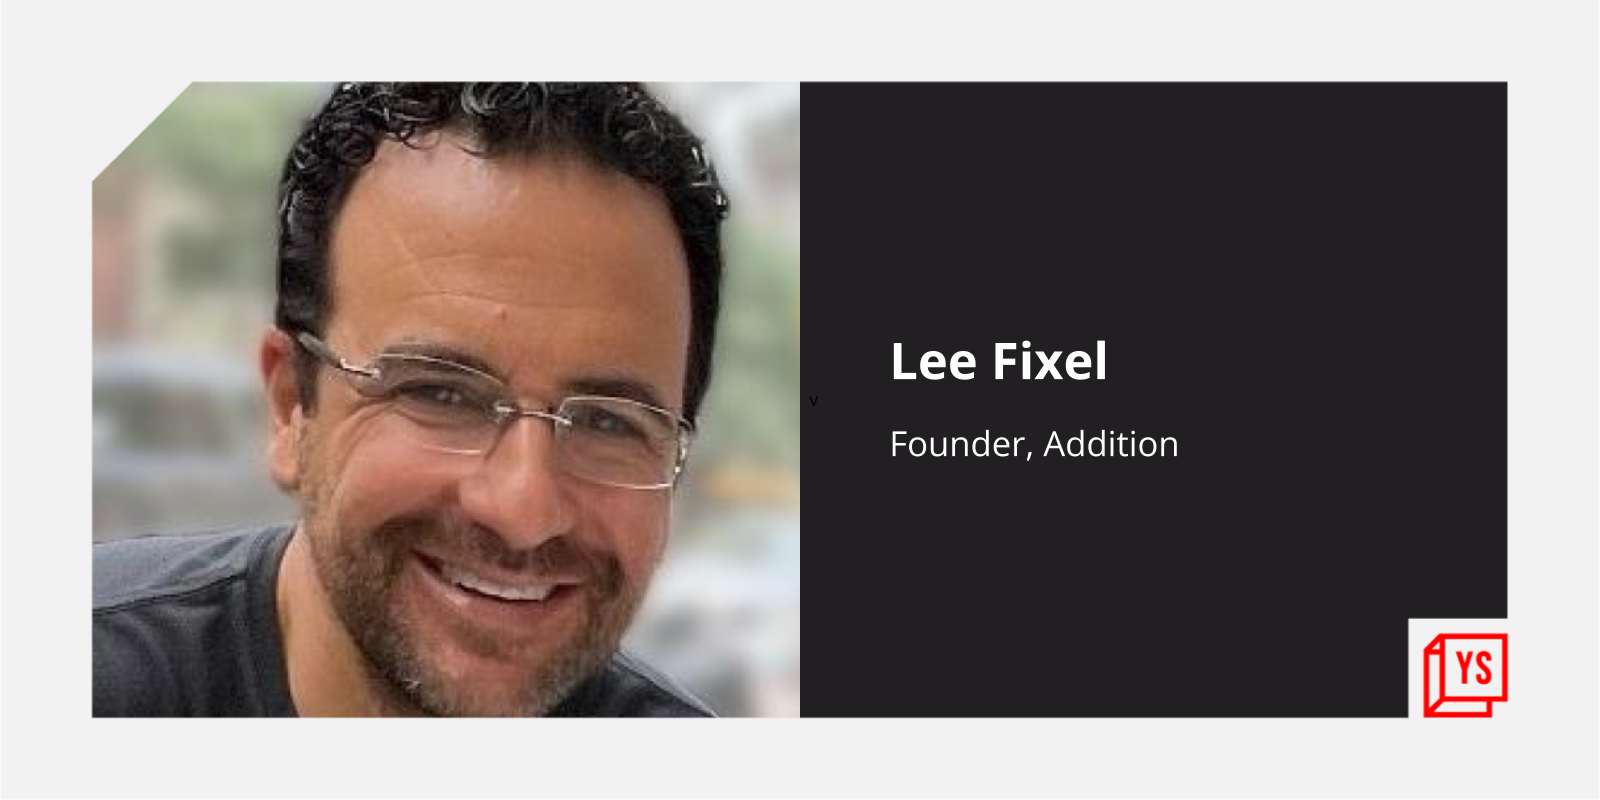 Lee Fixel's Addition launches new $ billion fund